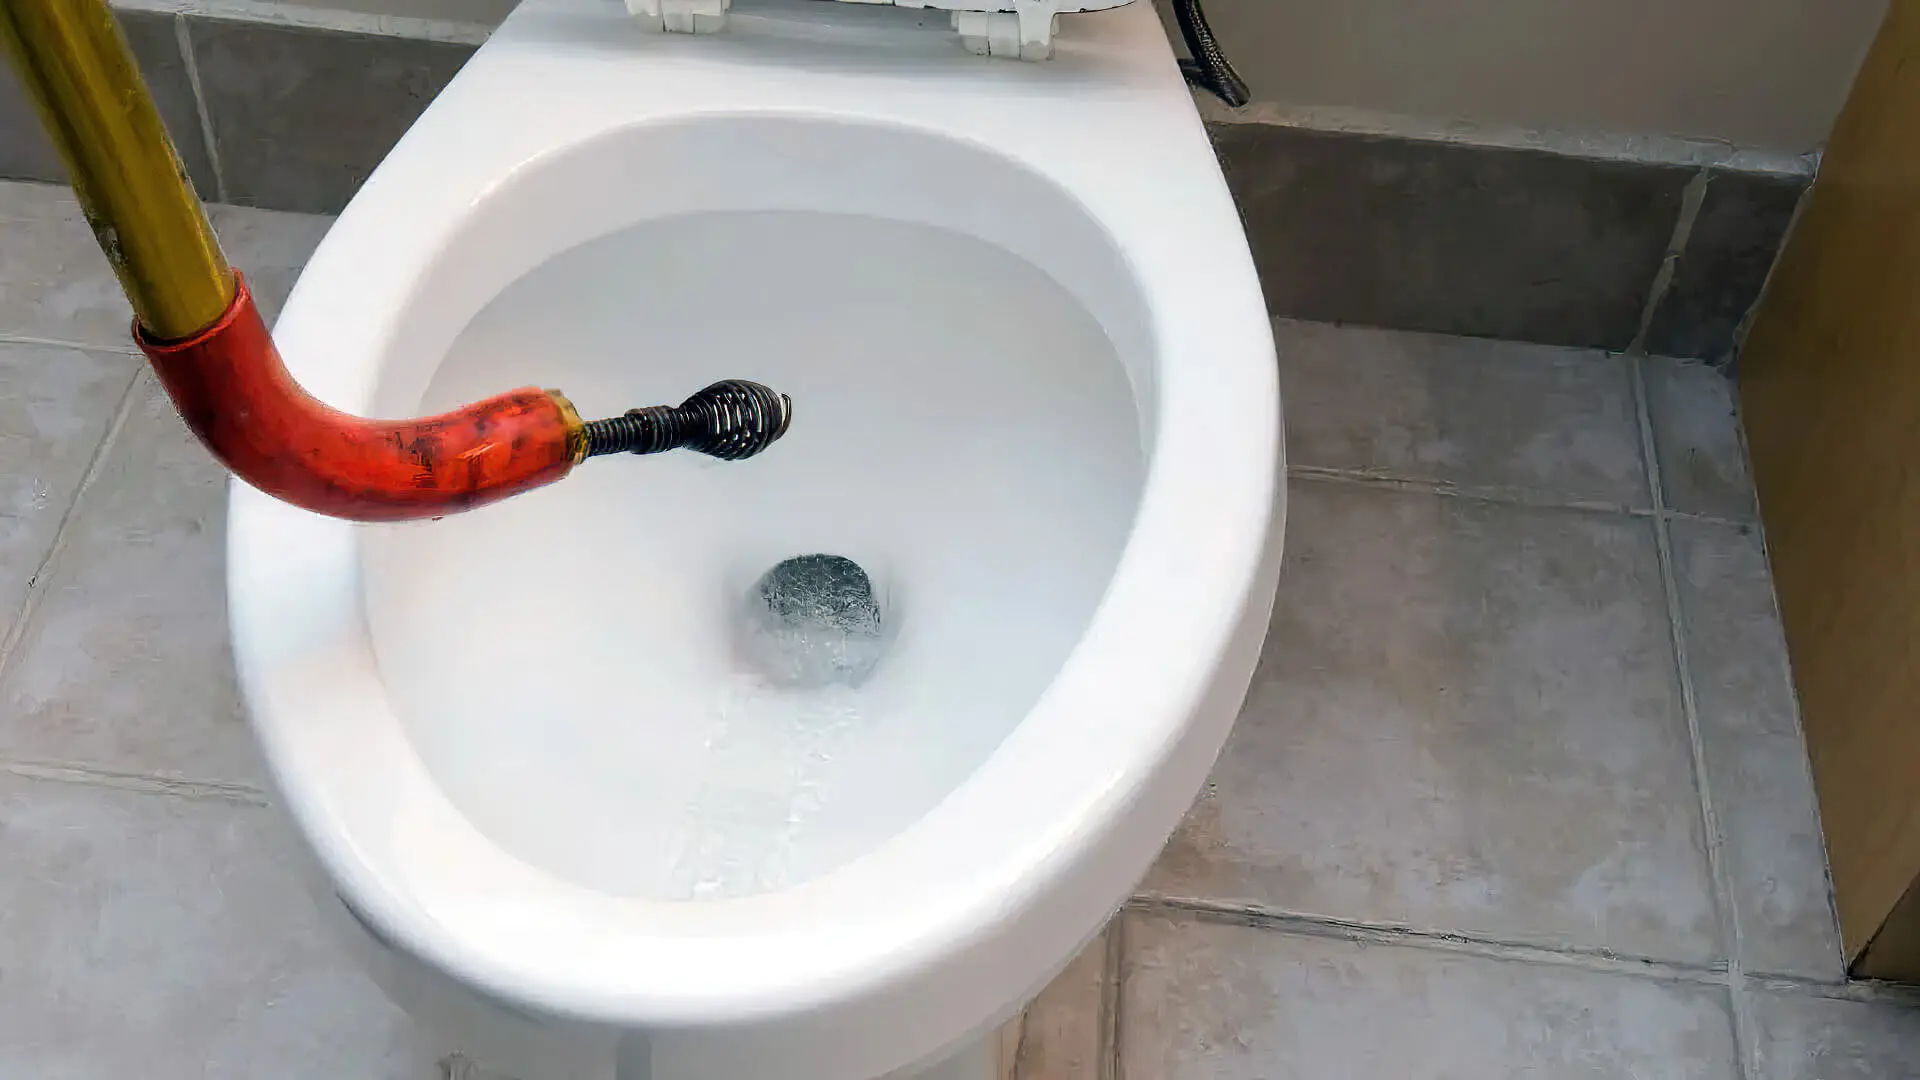 How To Use Plumbing Snake In Toilet